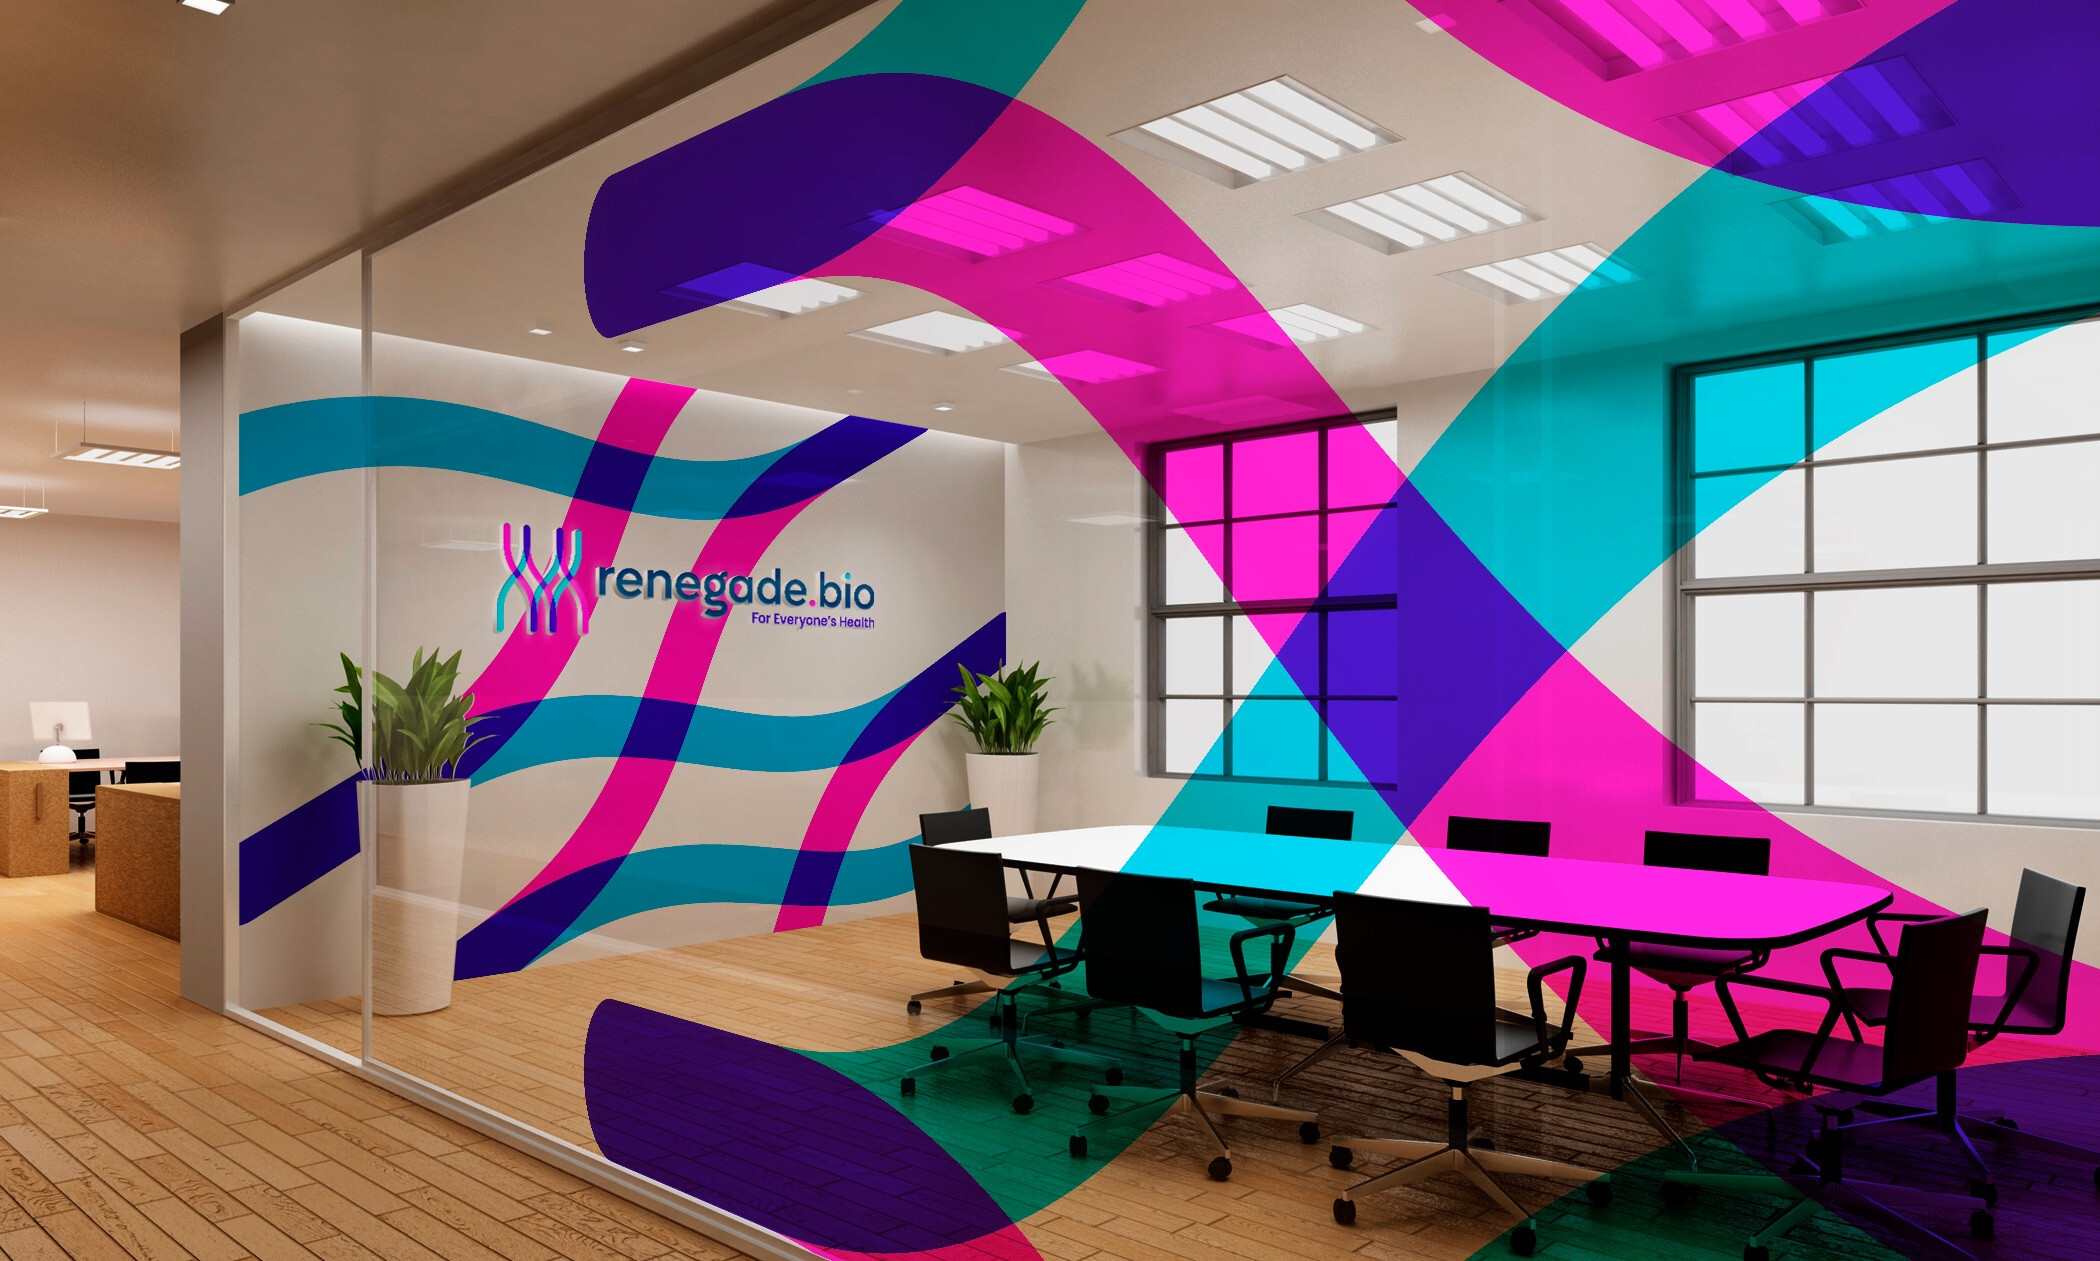 Concept imagery of an office with bright colorful helixes, as renegade.bio branded murals.